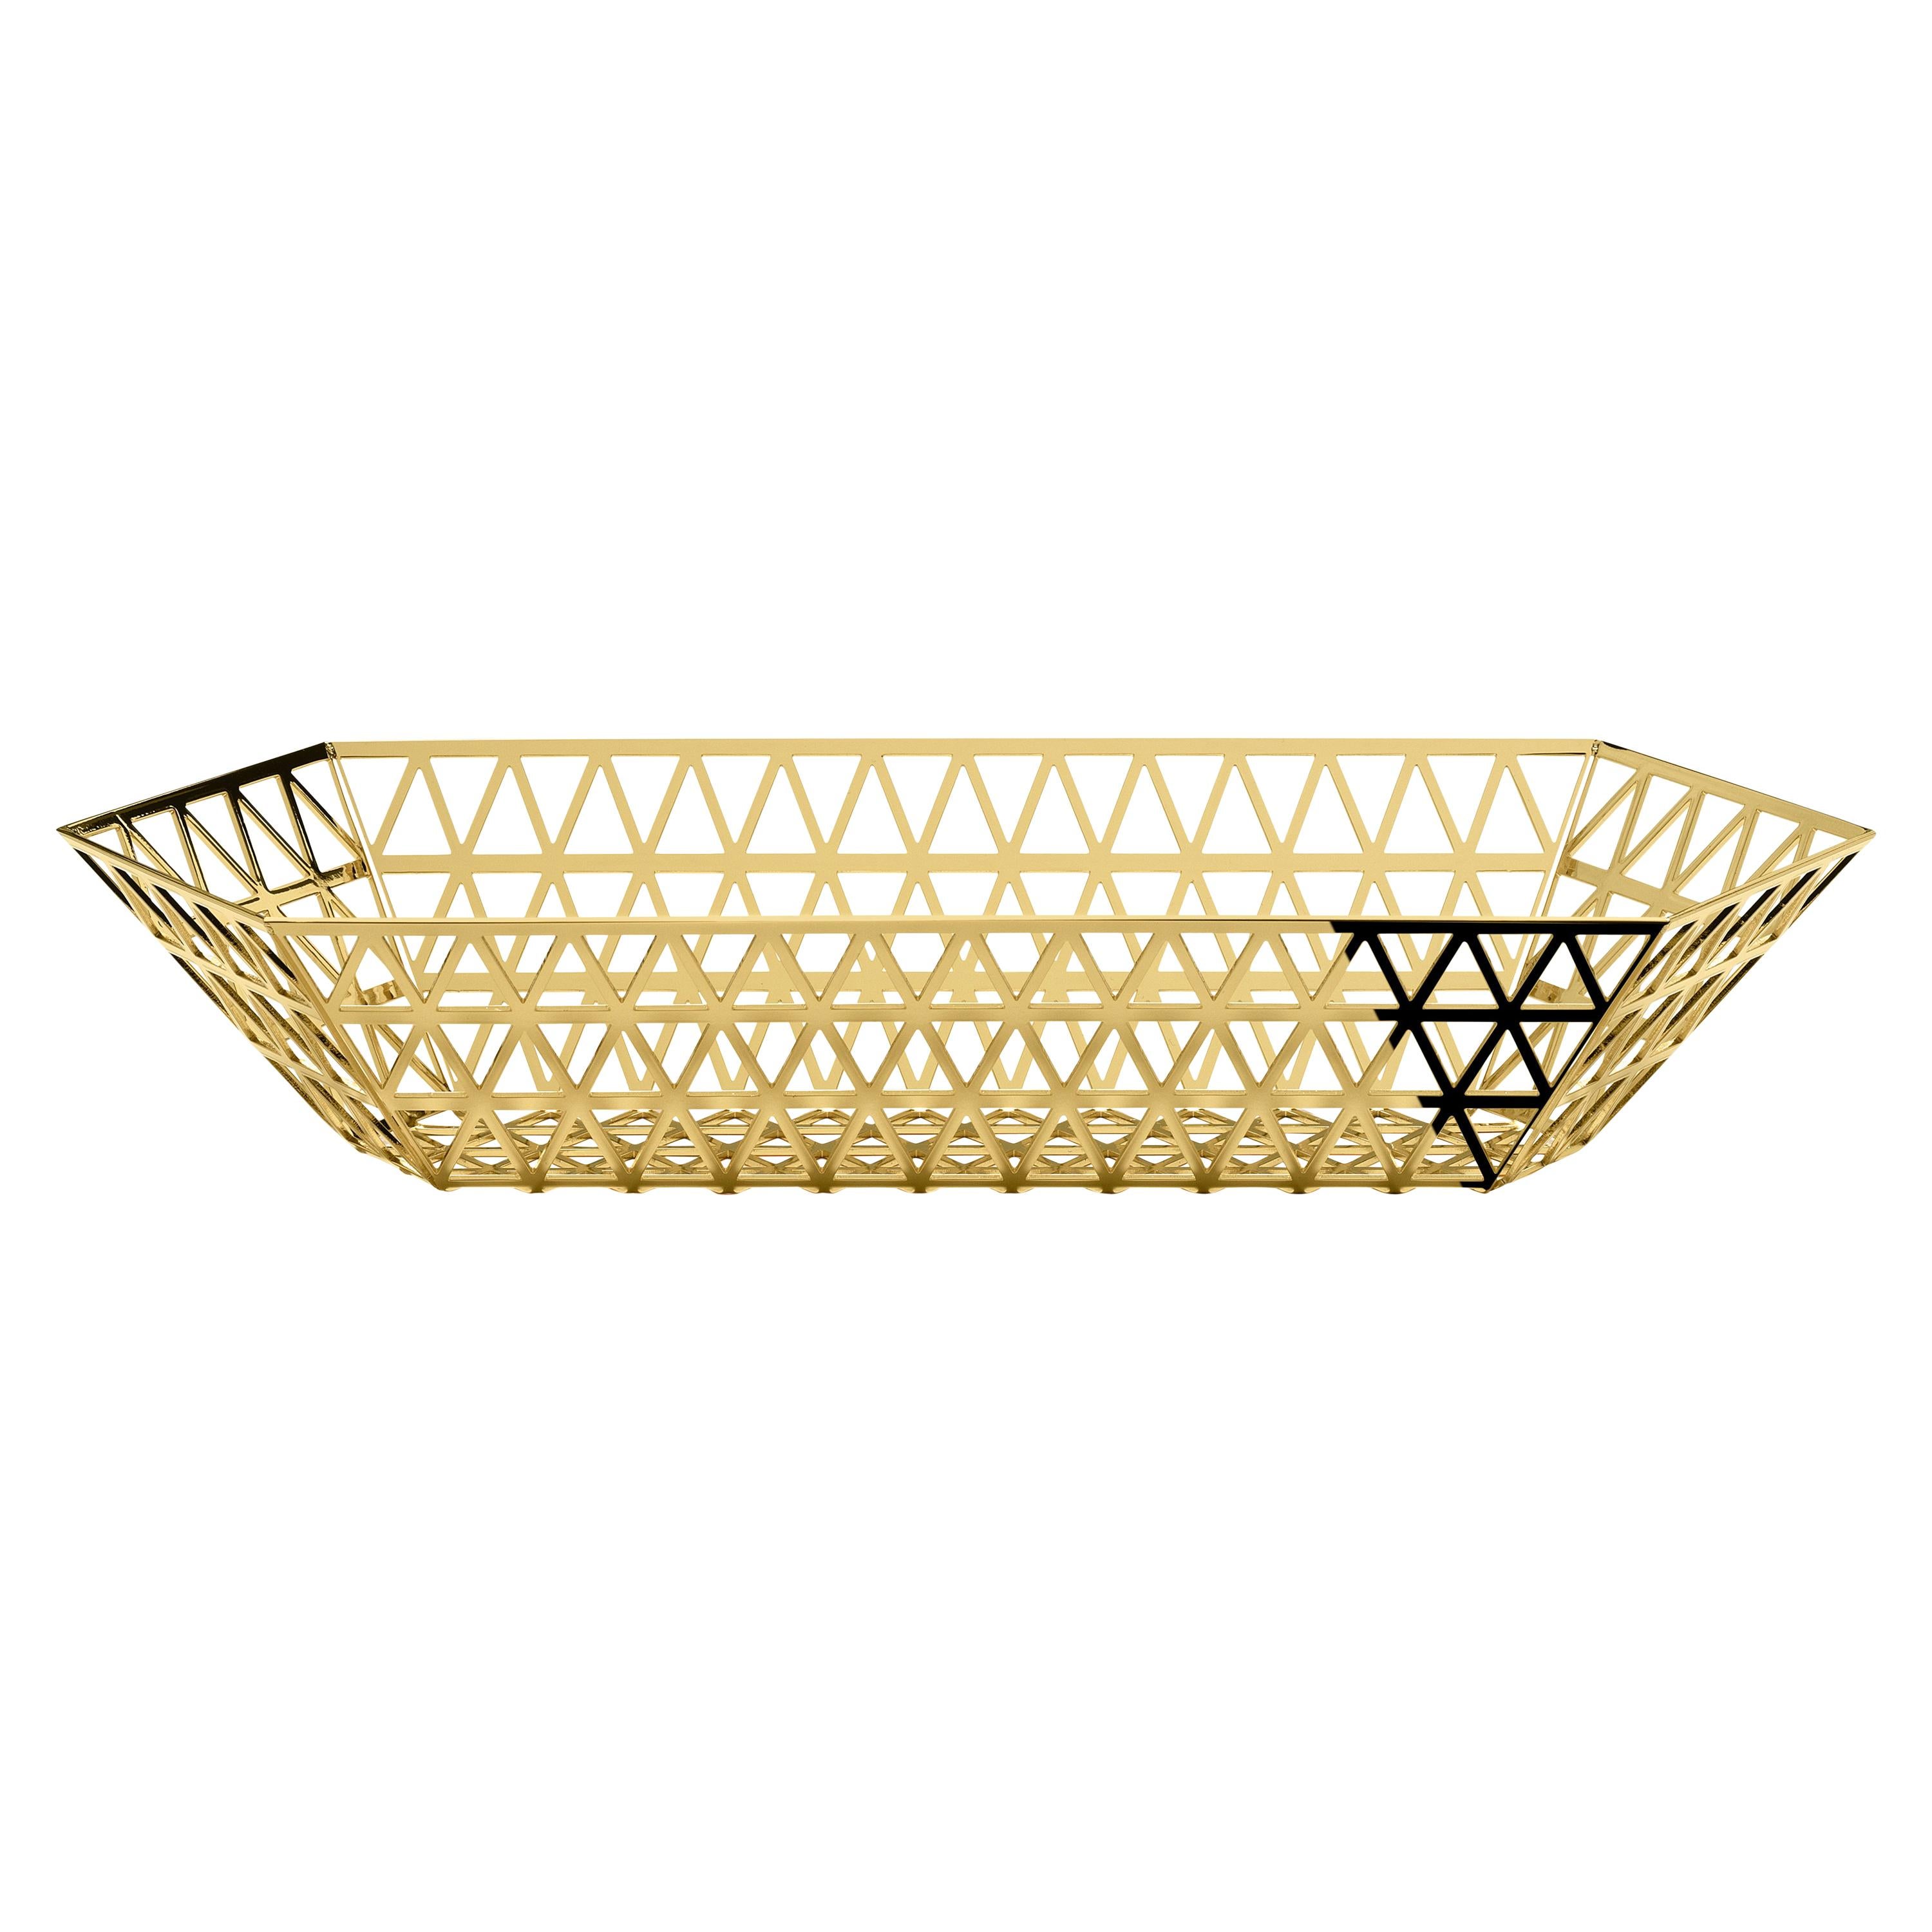 Ghidini 1961 Tip Top Limousine Tray in Gold by Richard Hutten